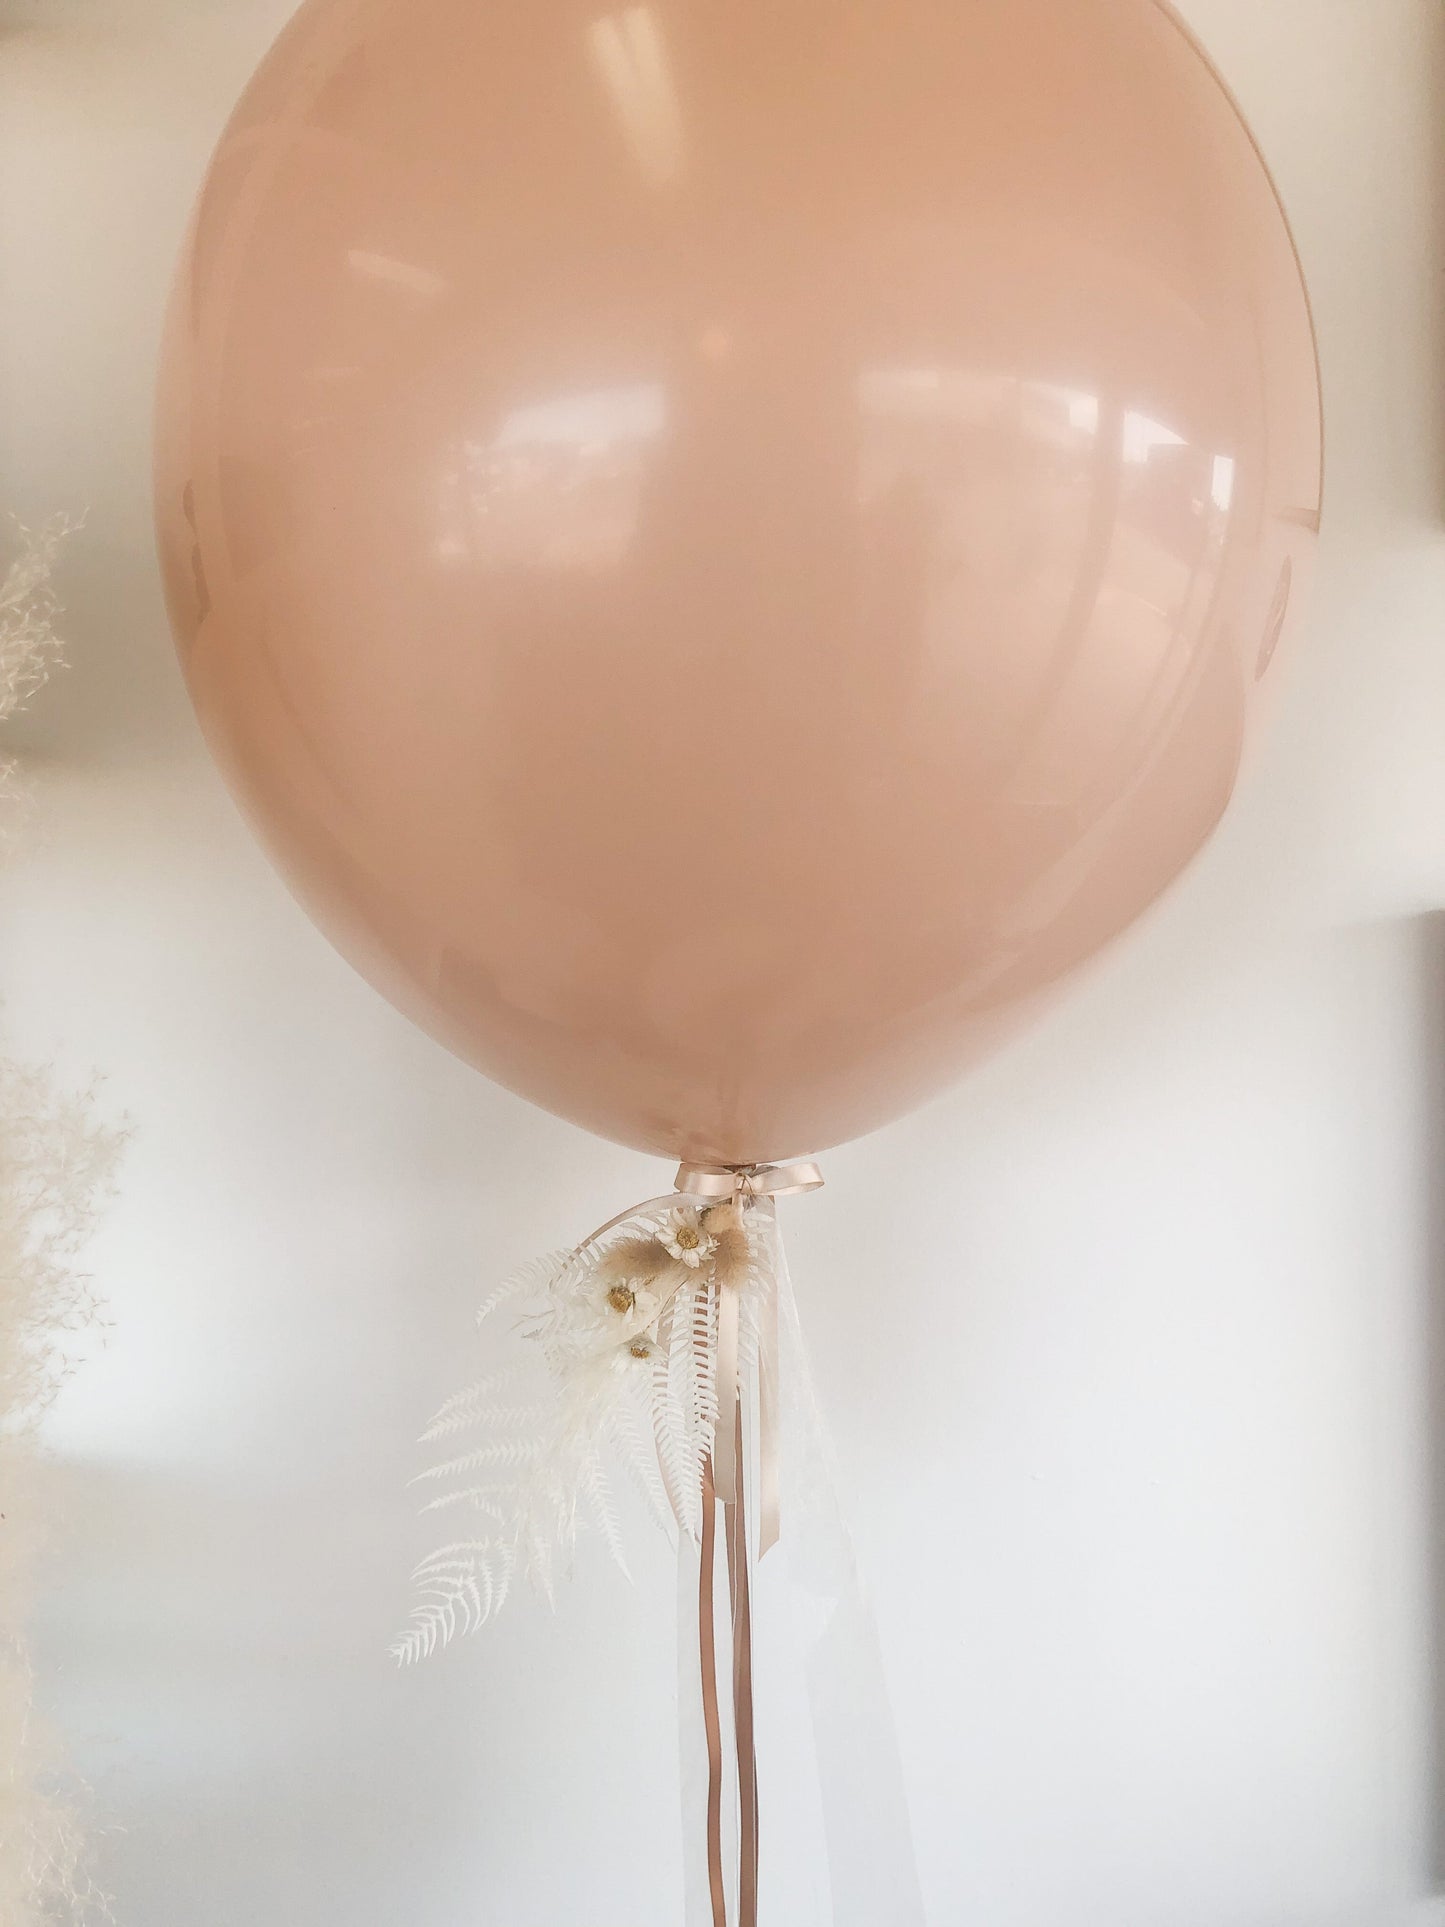 Mini Dried Posy for Balloons // by Newcastle Dried Flower Co